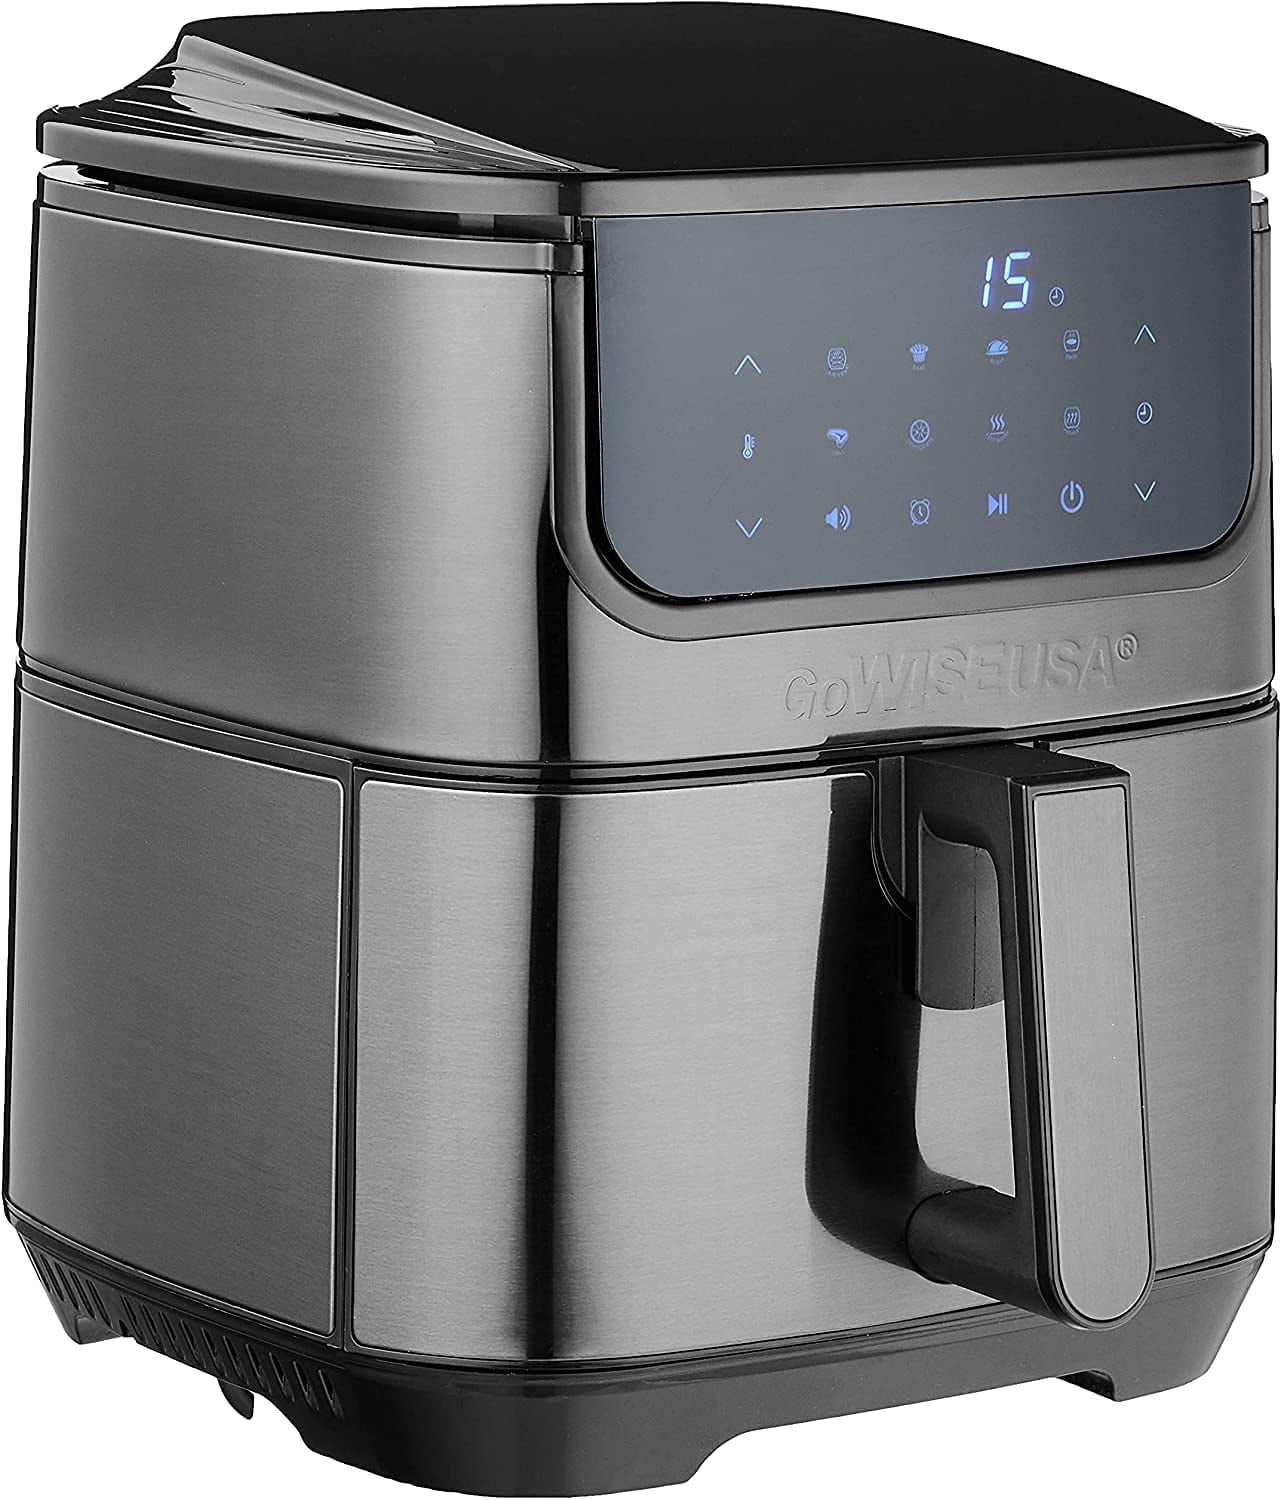 GoWISE USA 2.75 Quart Air Fryer Review - The Stripe